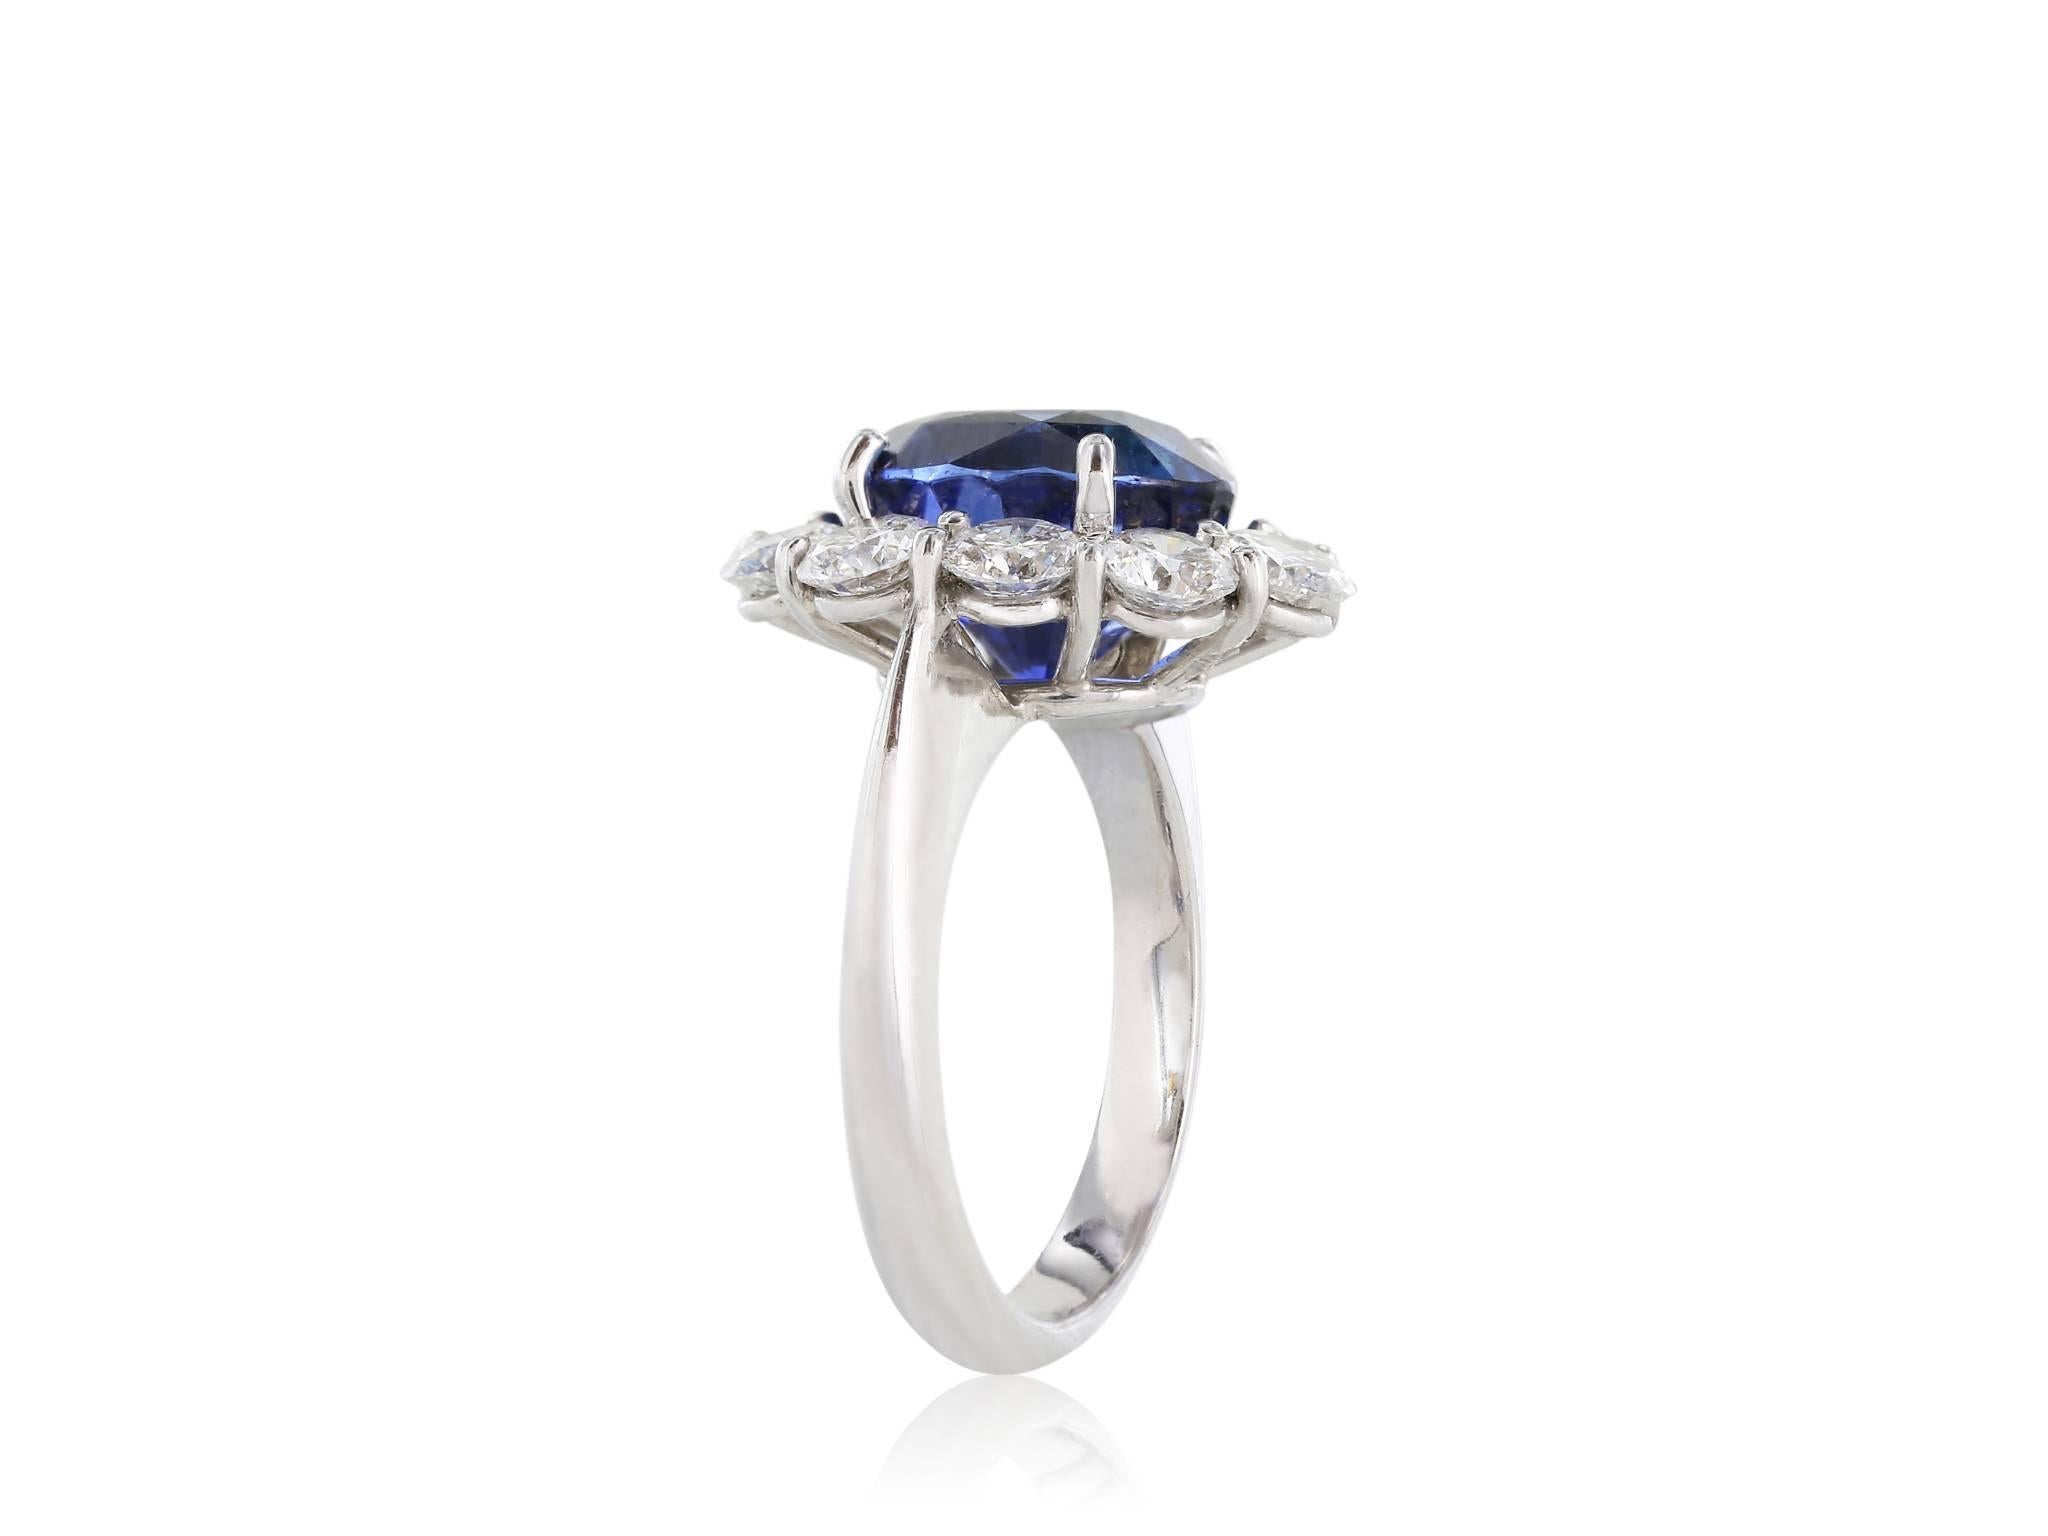 Custom made platinum setting and 18kt white gold shank, GIA Certified sapphire and diamond cluster ring. Consisting of one oval sapphire weighing 7.05 carats surrounded by ten round brilliant cut diamonds having a total weight of 2.52 carats. Ring